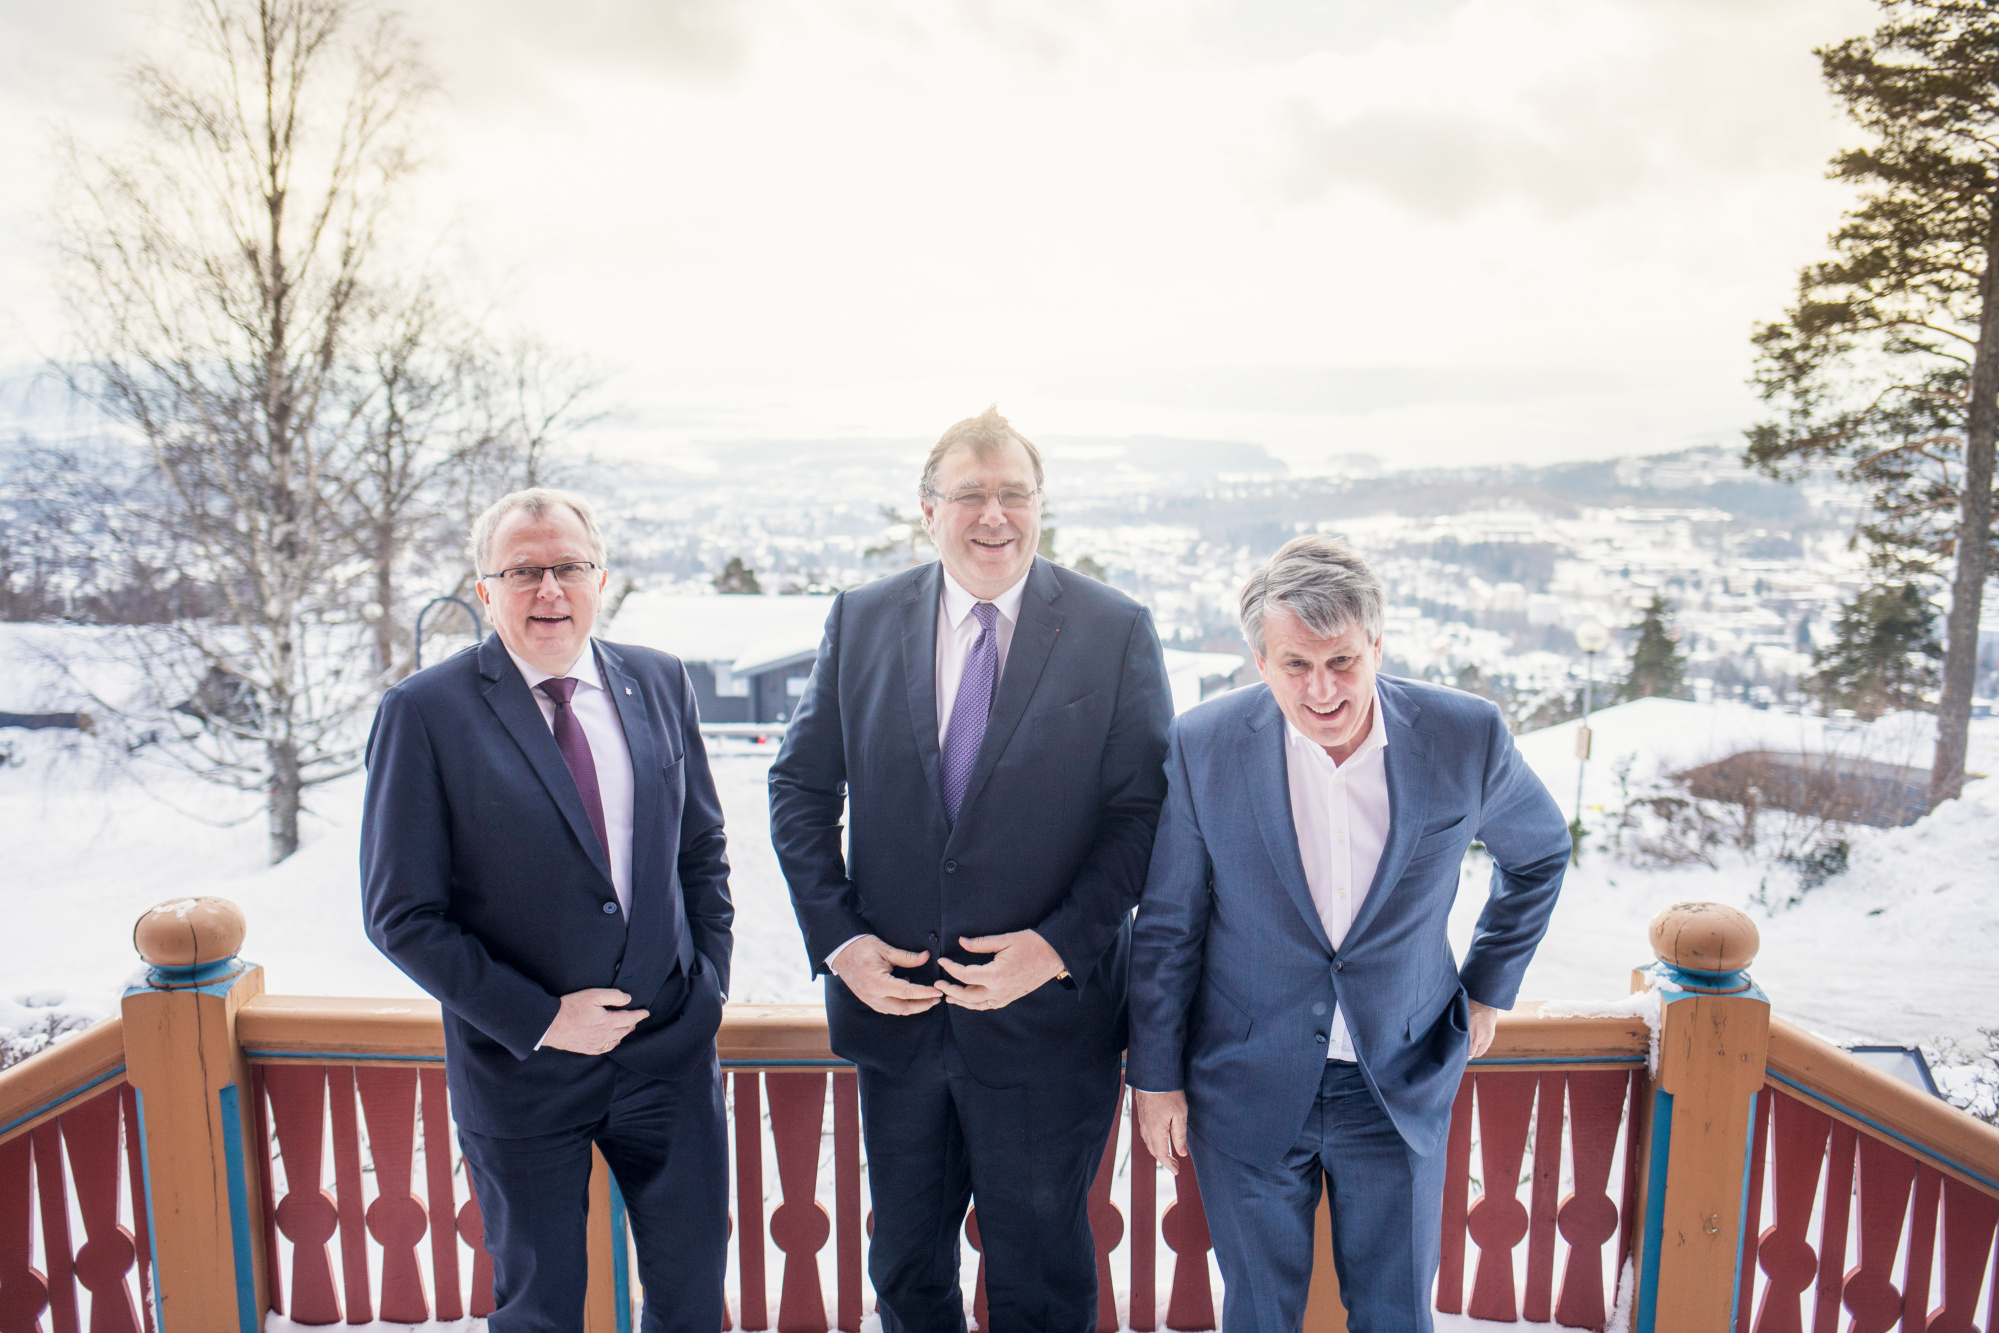 Eldar Saetre, chief executive officer of Statoil ASA, left, Patrick Pouyanne, chief executive officer of Total SA, center, and Ben van Beurden, chief executive officer of Royal Dutch Shell Plc, pose for a photograph following an interview on the sidelines of an energy conference in Oslo, Norway, on Thursday, Feb. 15, 2018. The bosses of three of the worlds biggest oil companies gathered on the sidelines of an energy conference to make the case for a flagship Norwegian project, in which the companies plan to store CO2 emissions under the North Sea after they've been shipped and piped from onshore industrial plants. Photographer: Kyrre Lien/Bloomberg